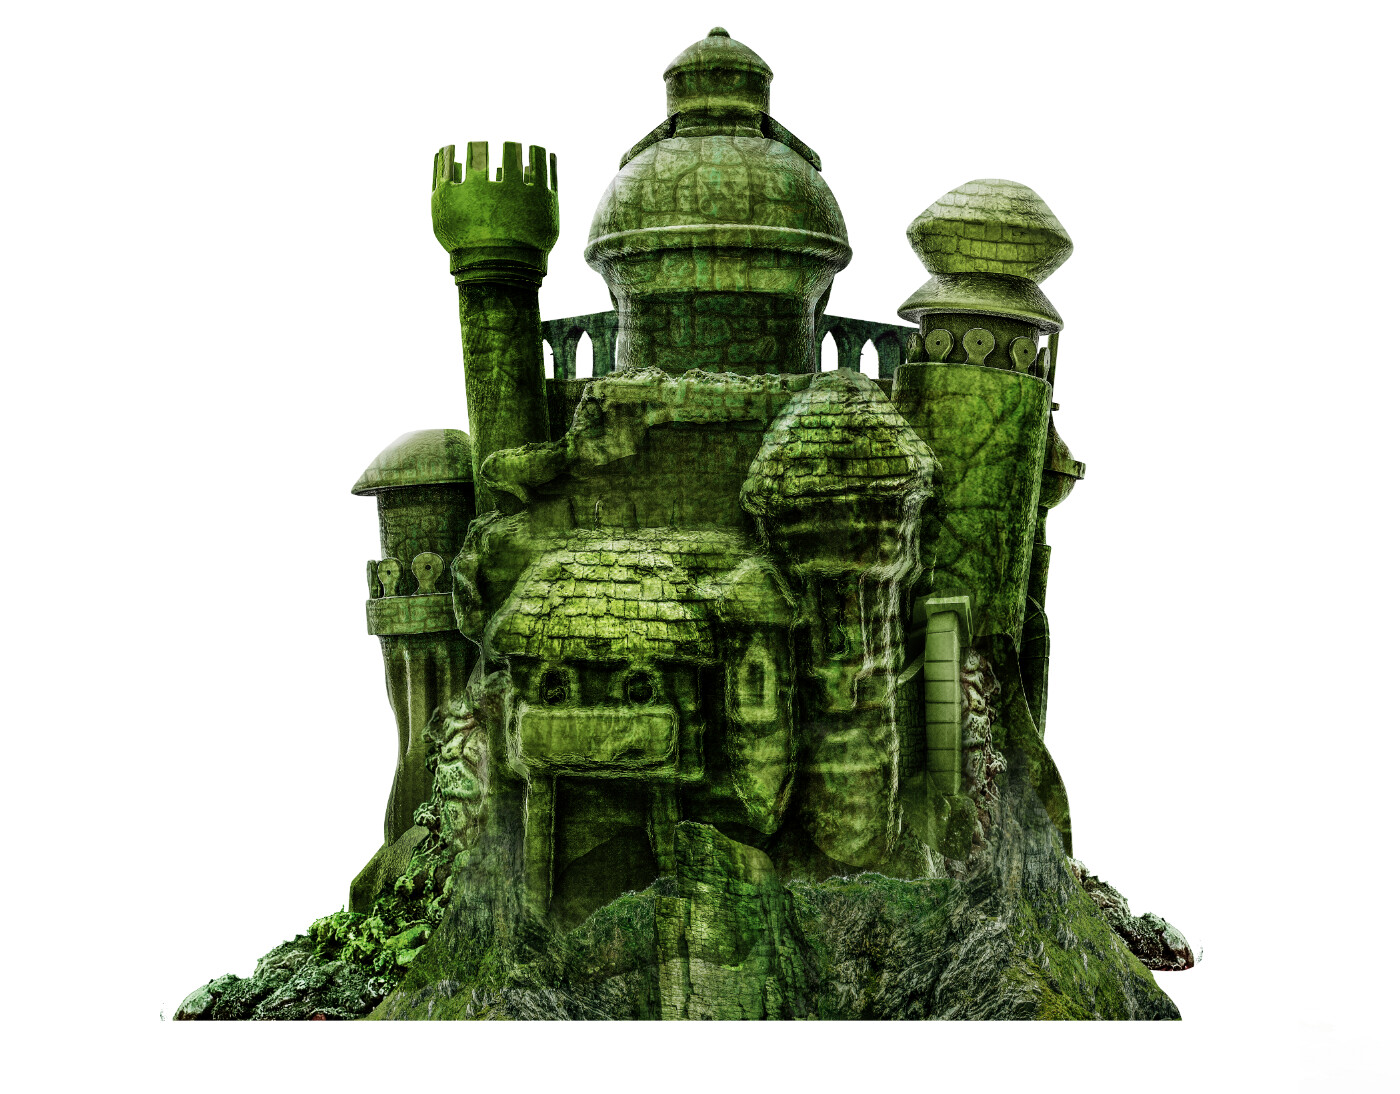 Castle Grayskull back view based on 14th century local castle. some parts directly based on original toy grayskull